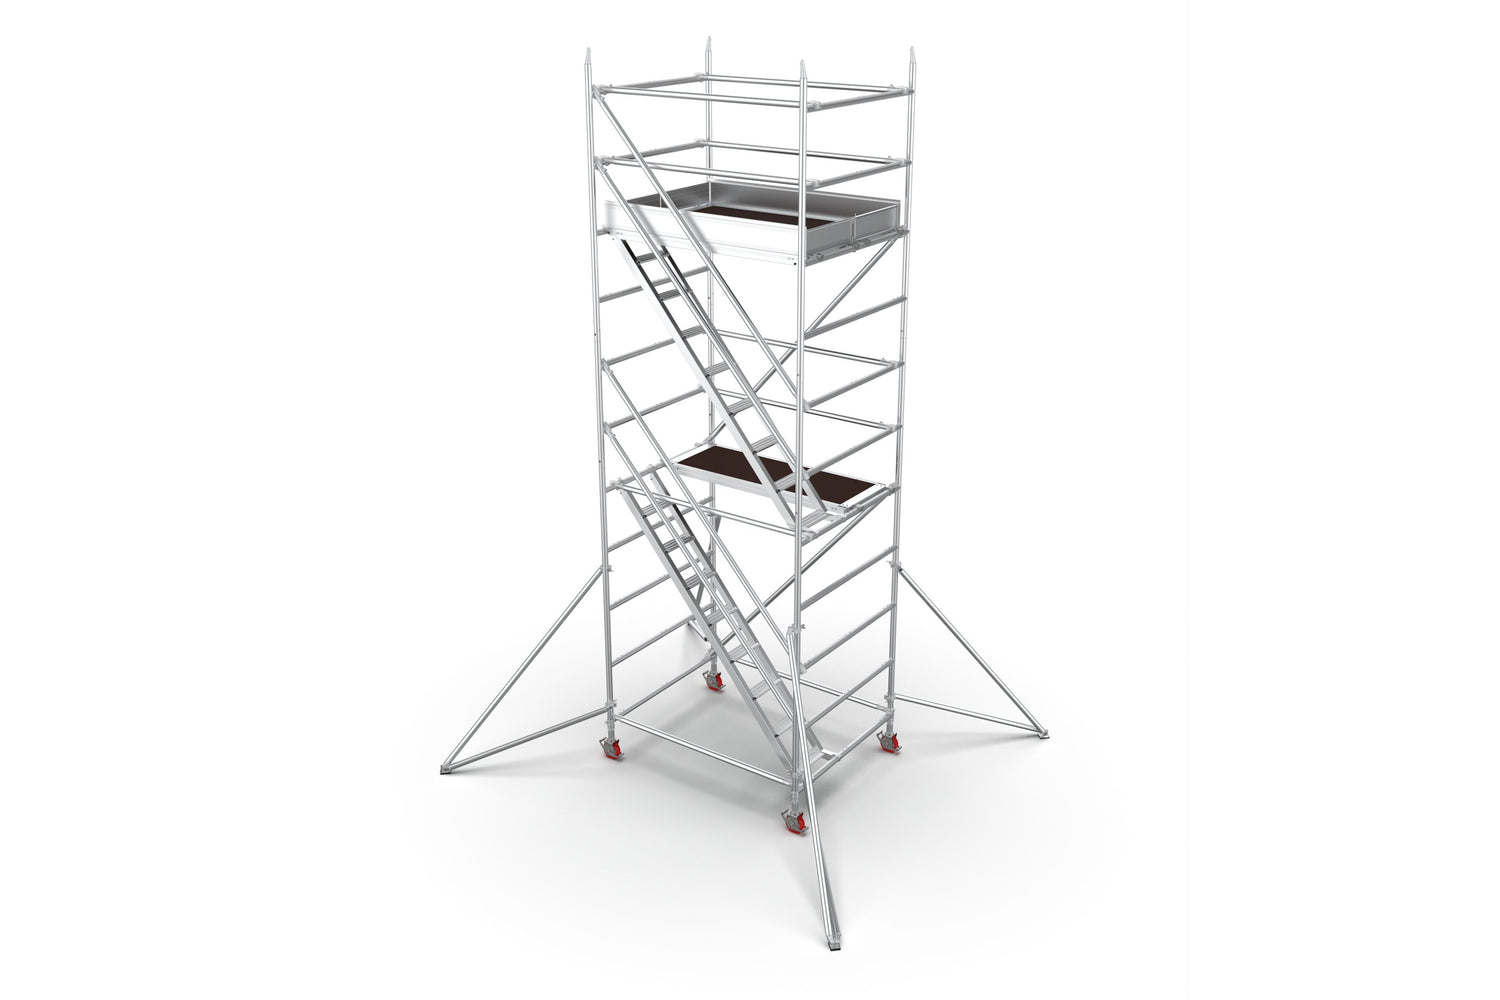 A render of the Alto HD Stair Tower